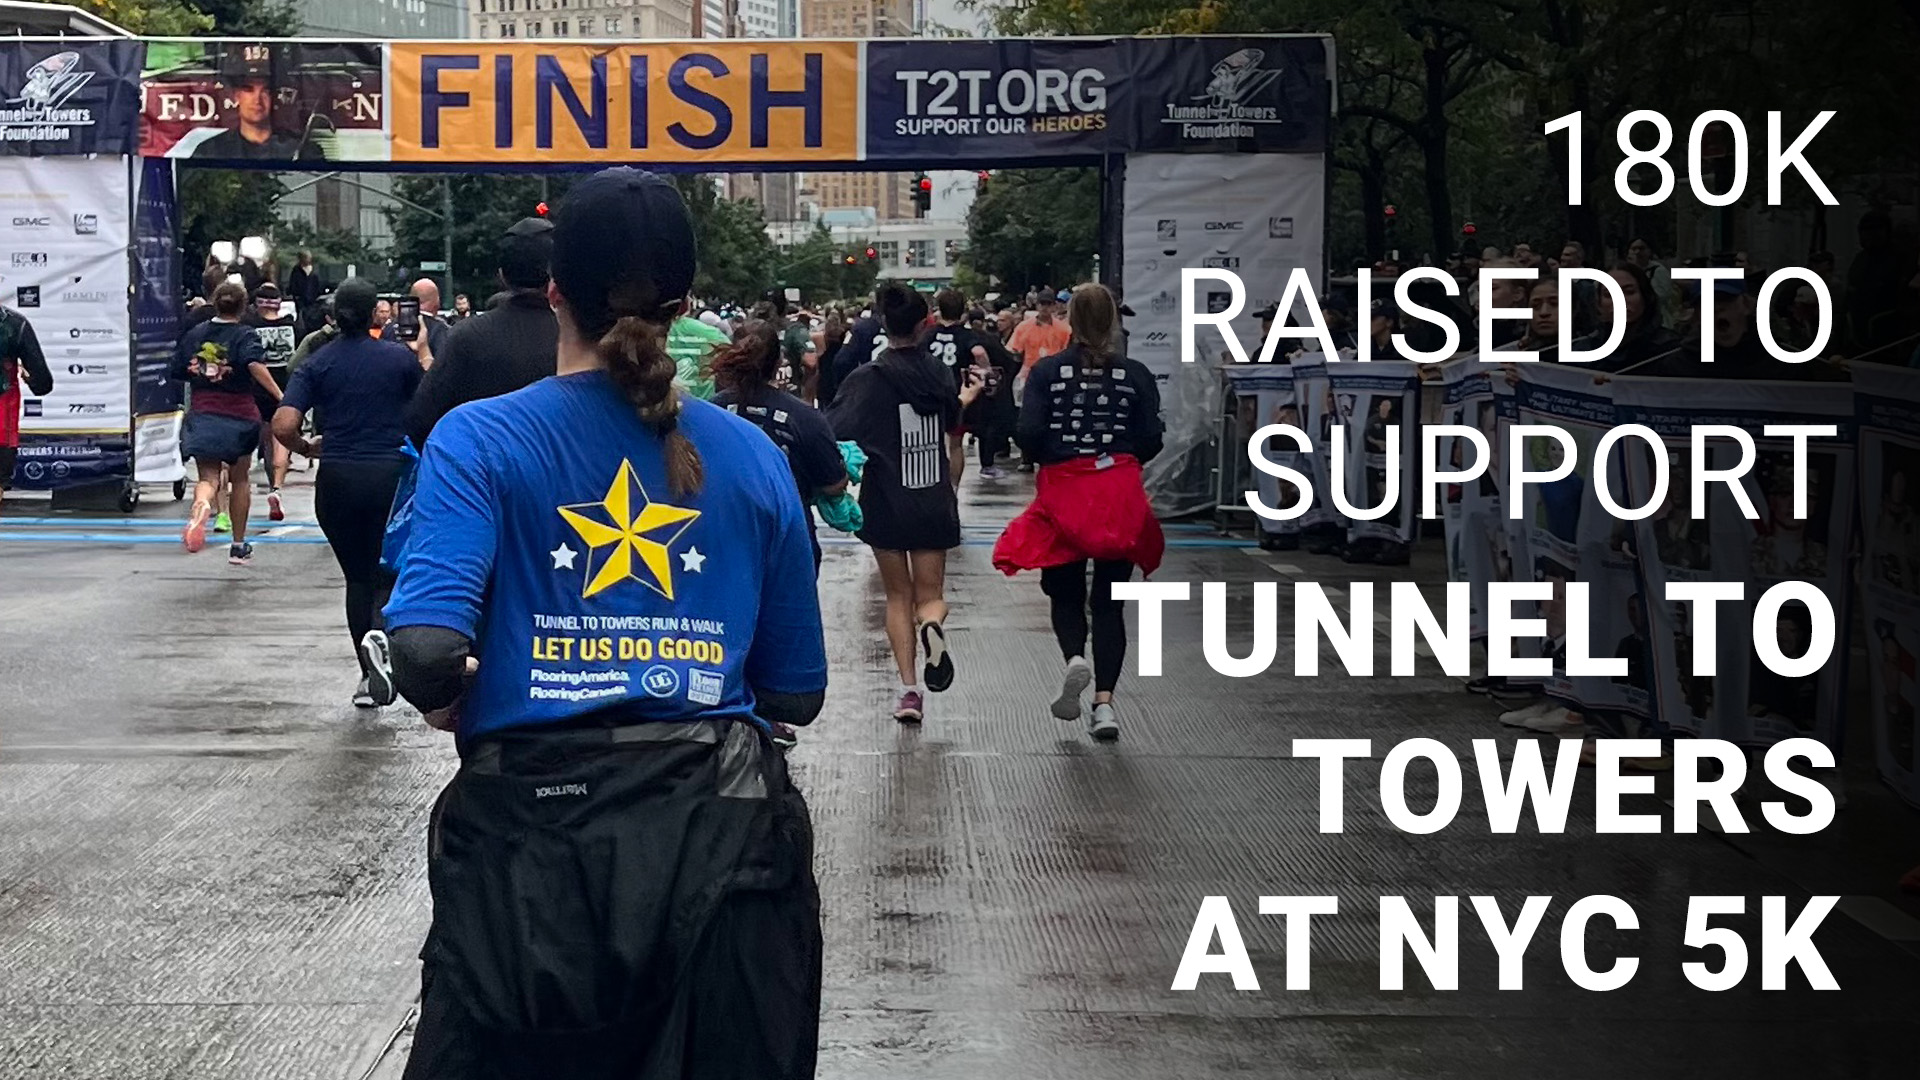 CCA Tunnels to Towers Fundraising